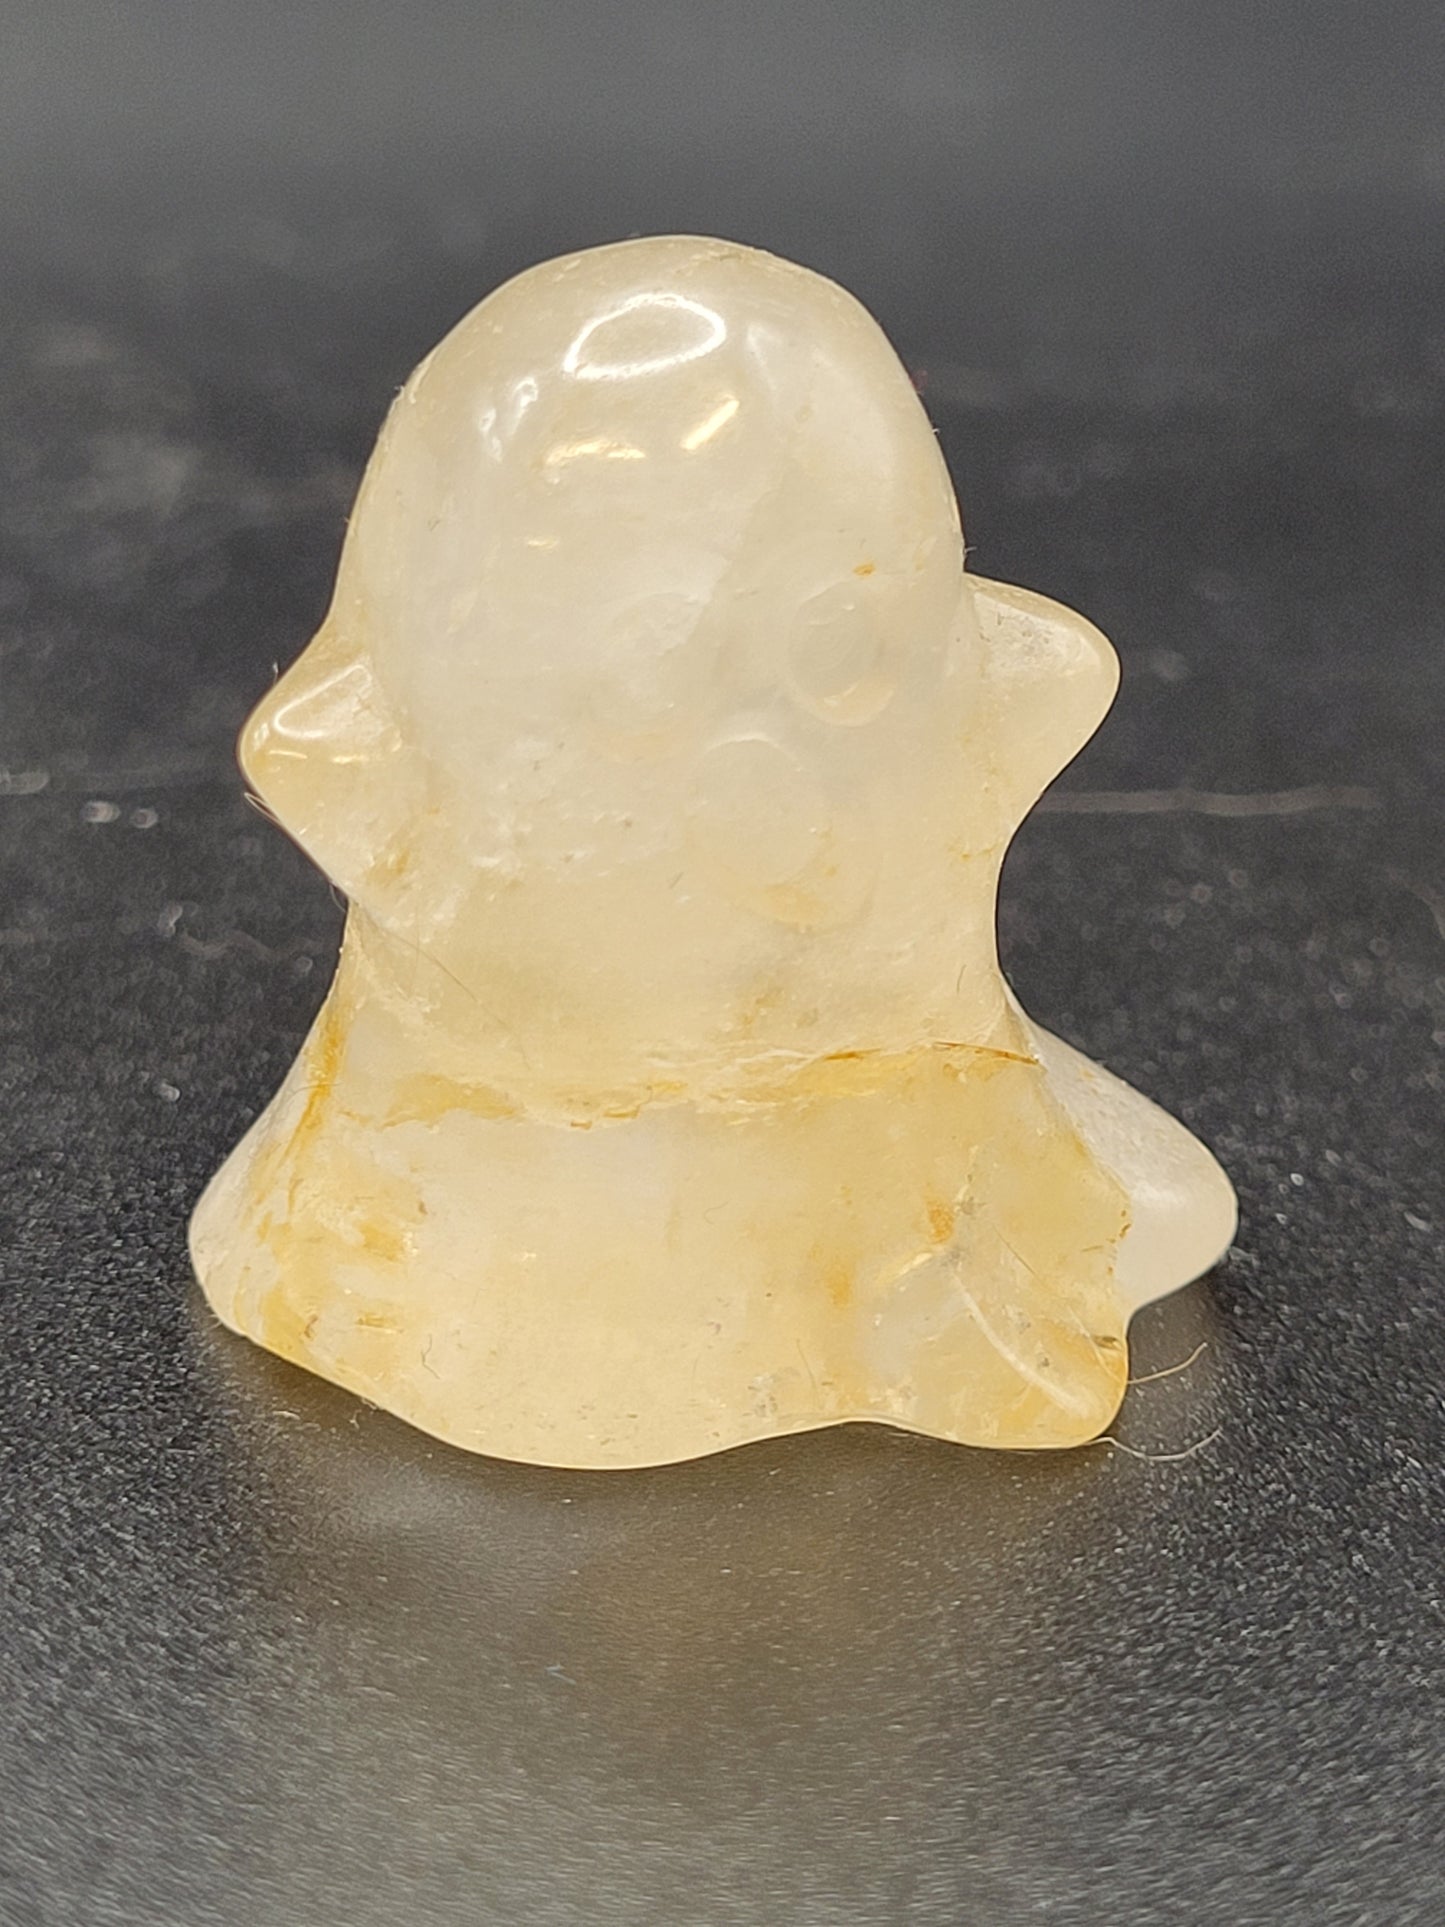 Ghosts - Clear Quartz w/ Golden Healer and/or Inclusions